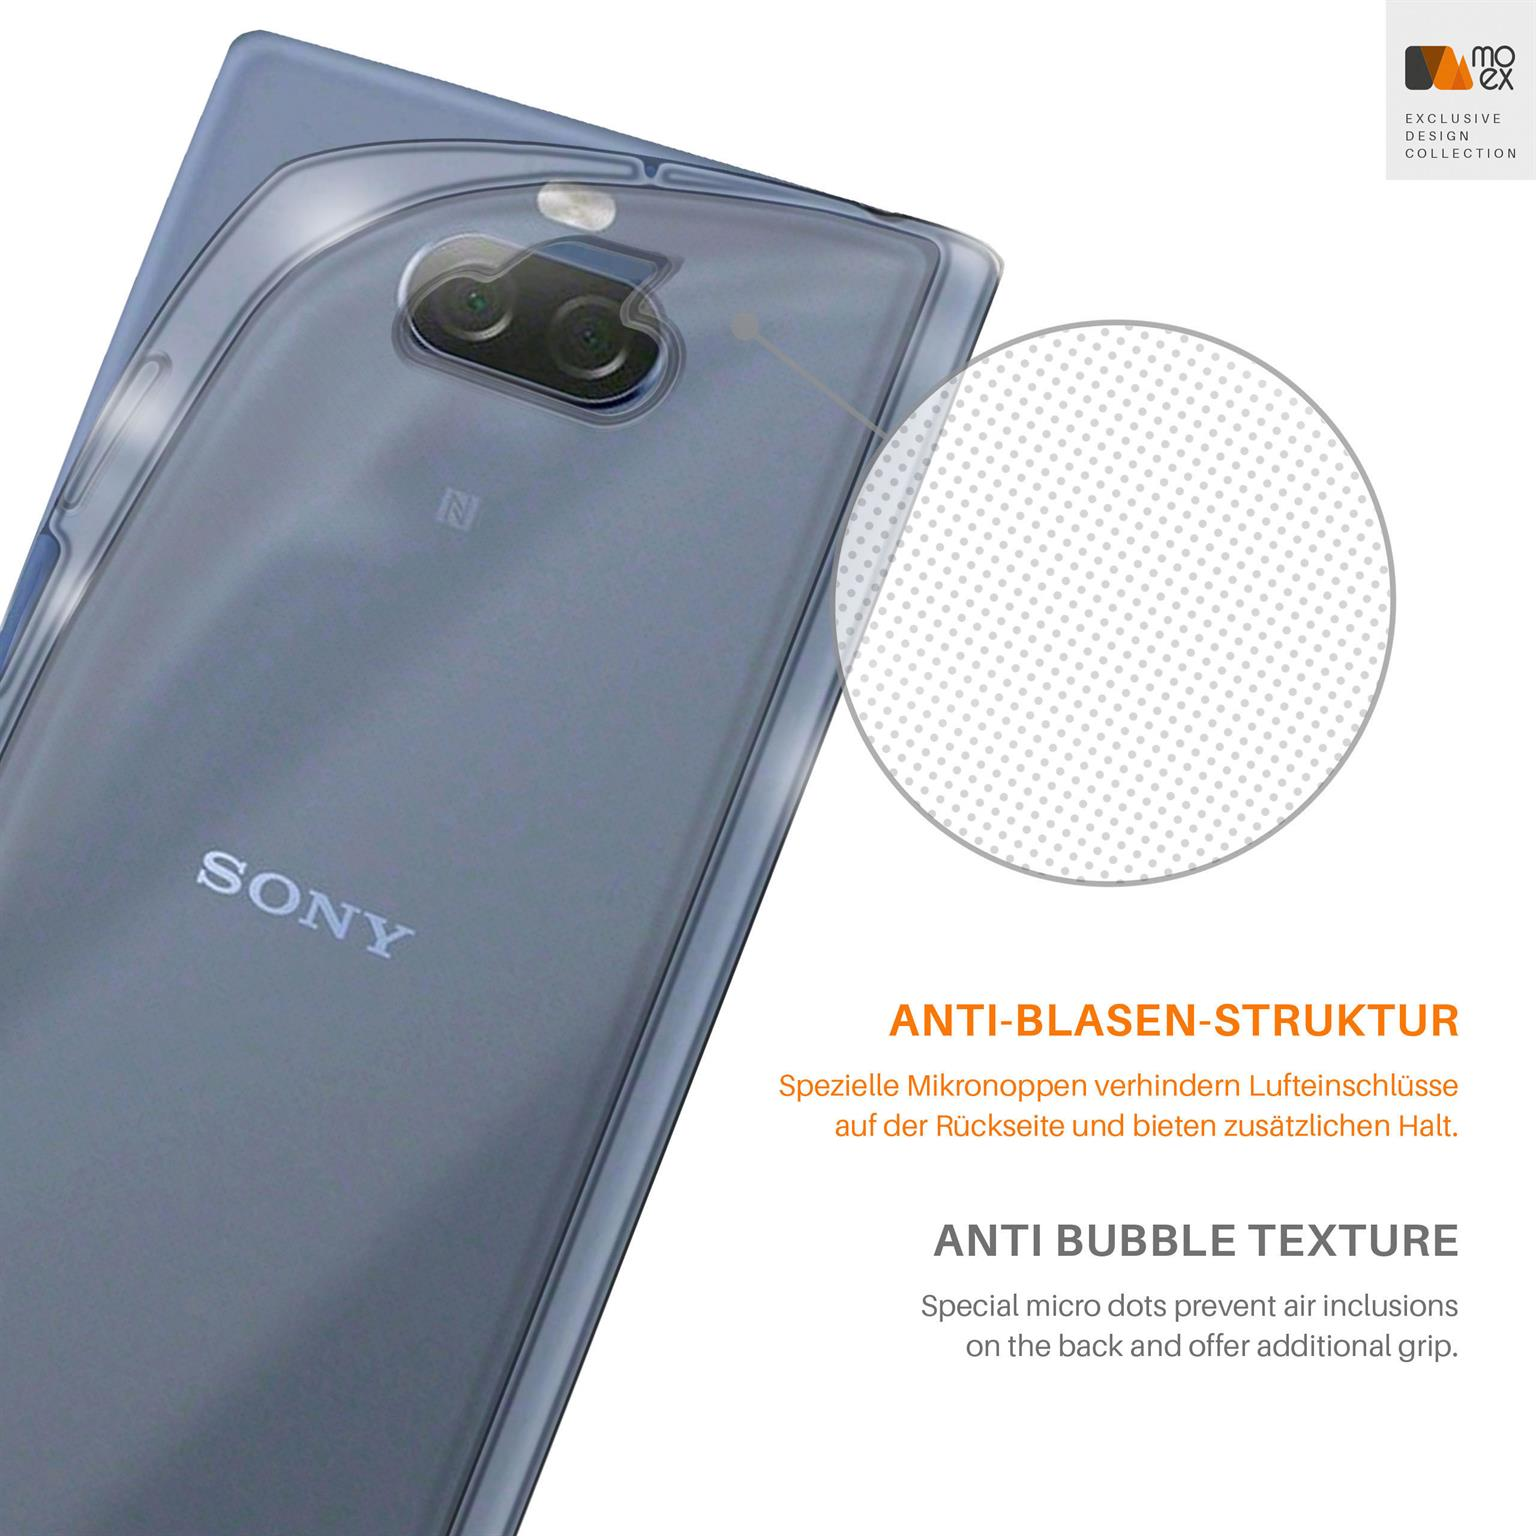 MOEX Xperia Plus, Aero 10 Case, Sony, Backcover, Crystal-Clear